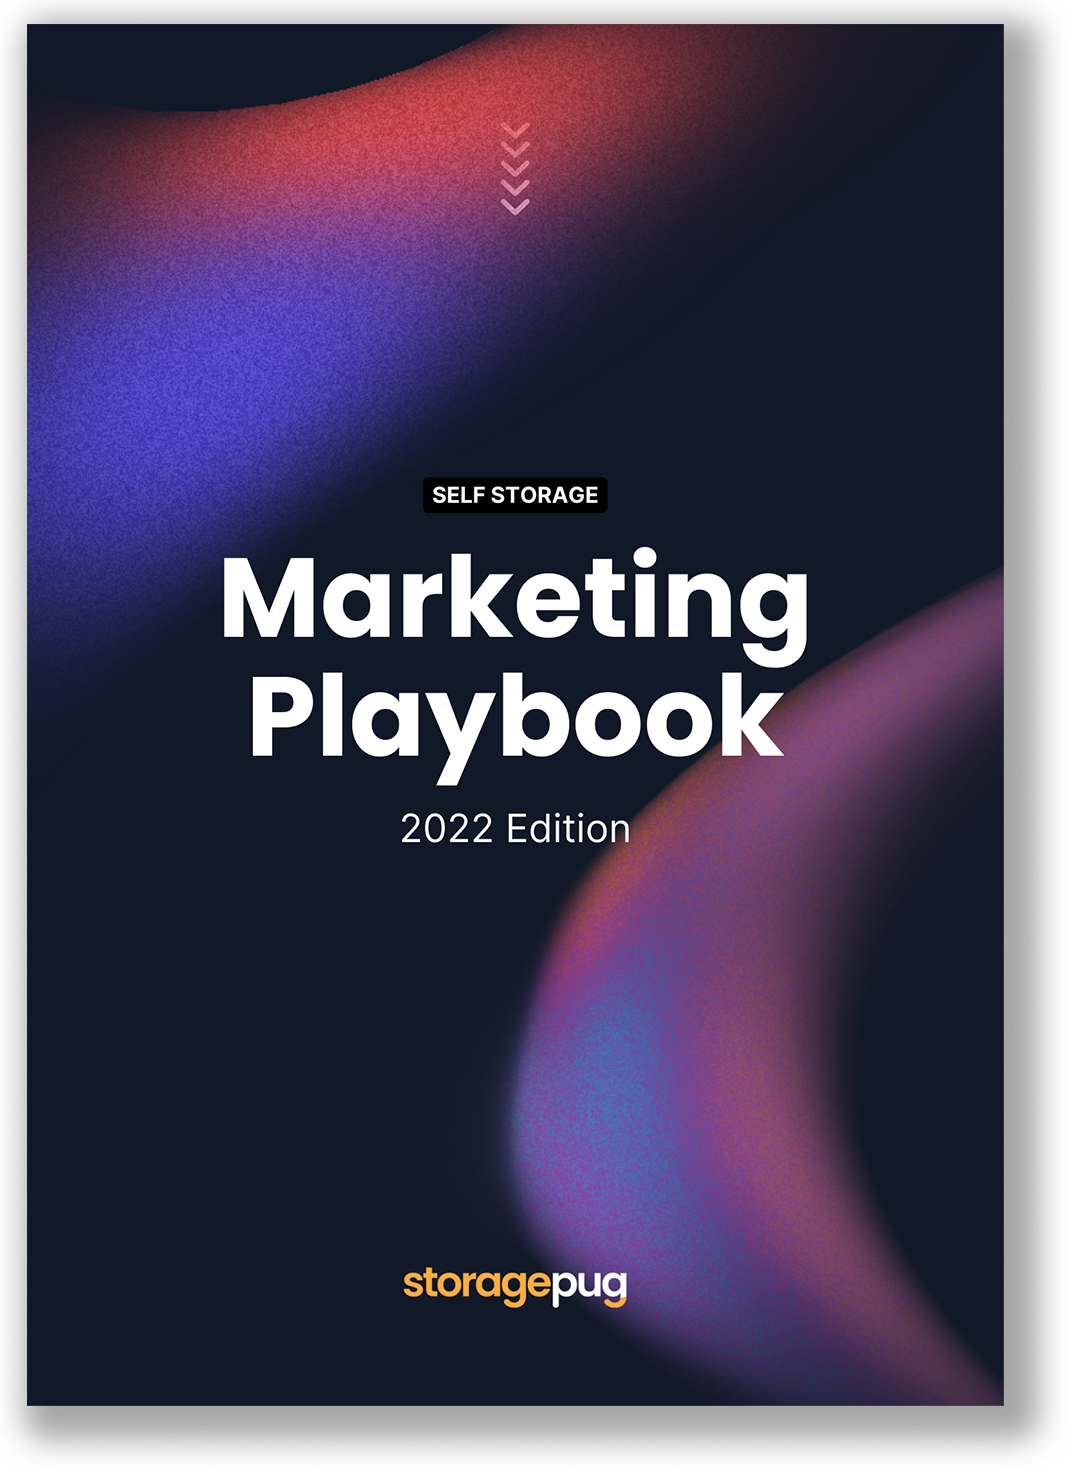 Marketing Playbook Cover - Dropshadow